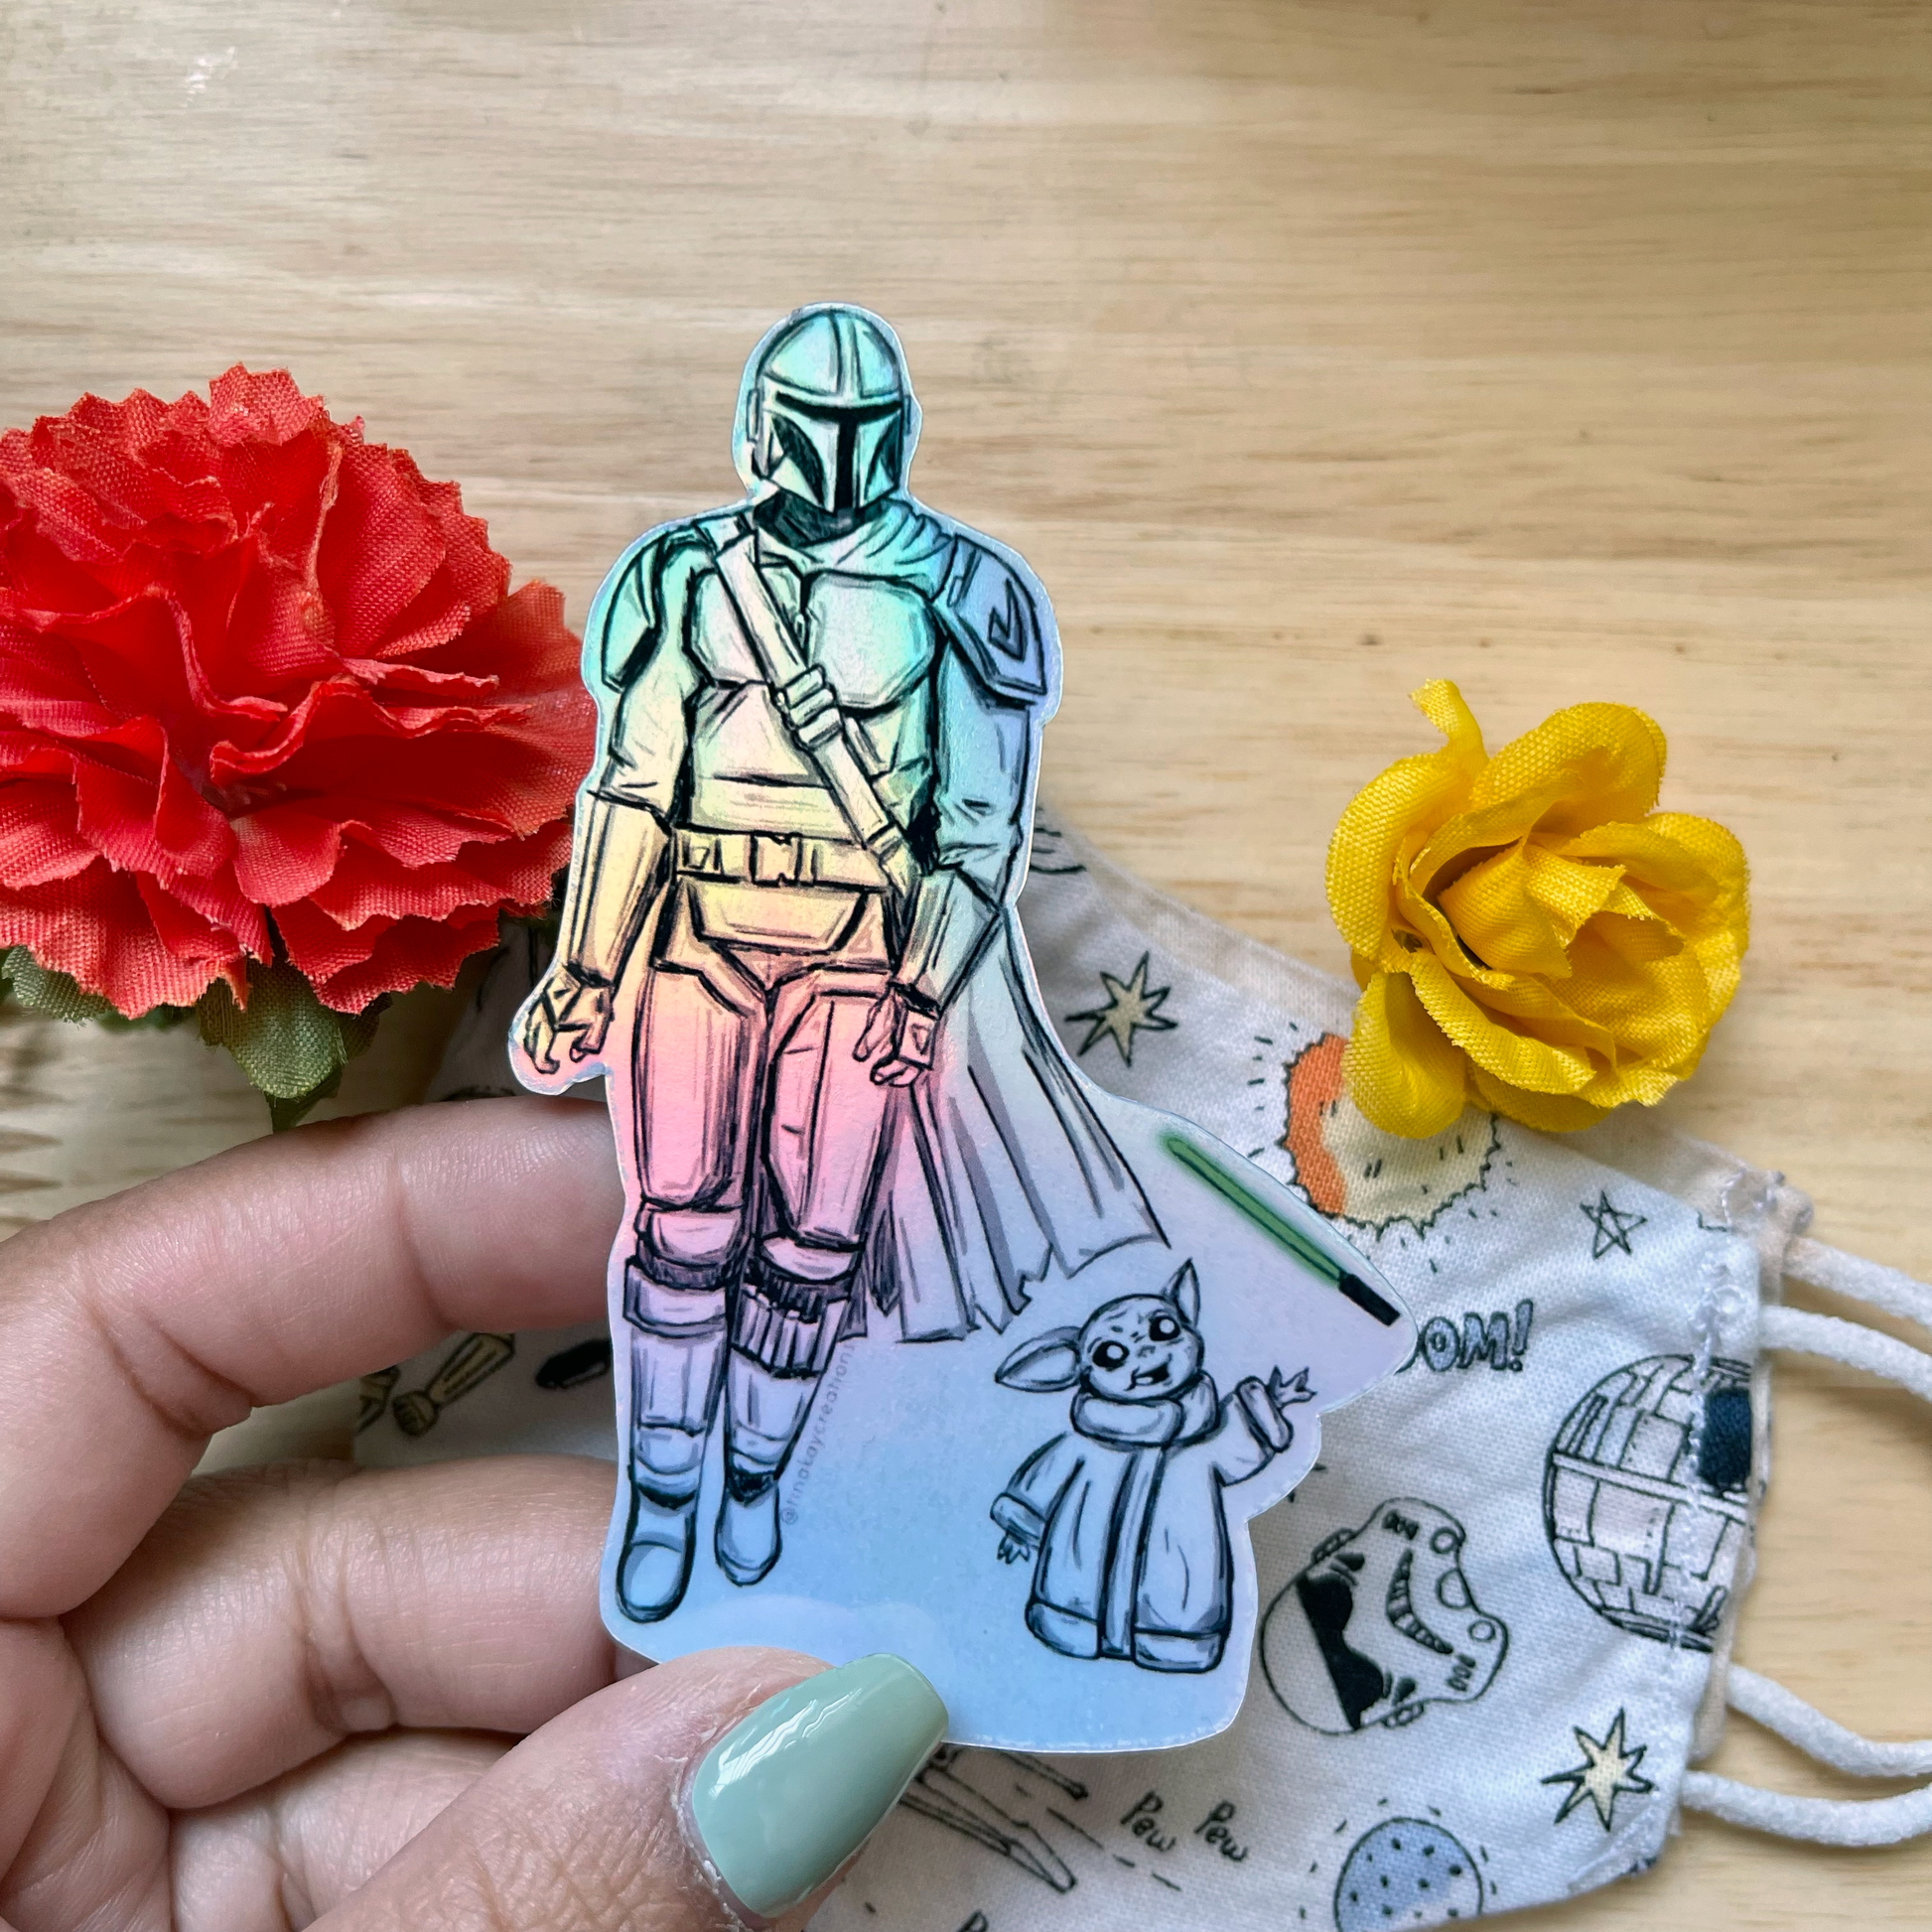 Holographic Mandalorian and Grogu Black Grayscale Sketch Water Resistant Die Cut Sticker - TinakayCreations